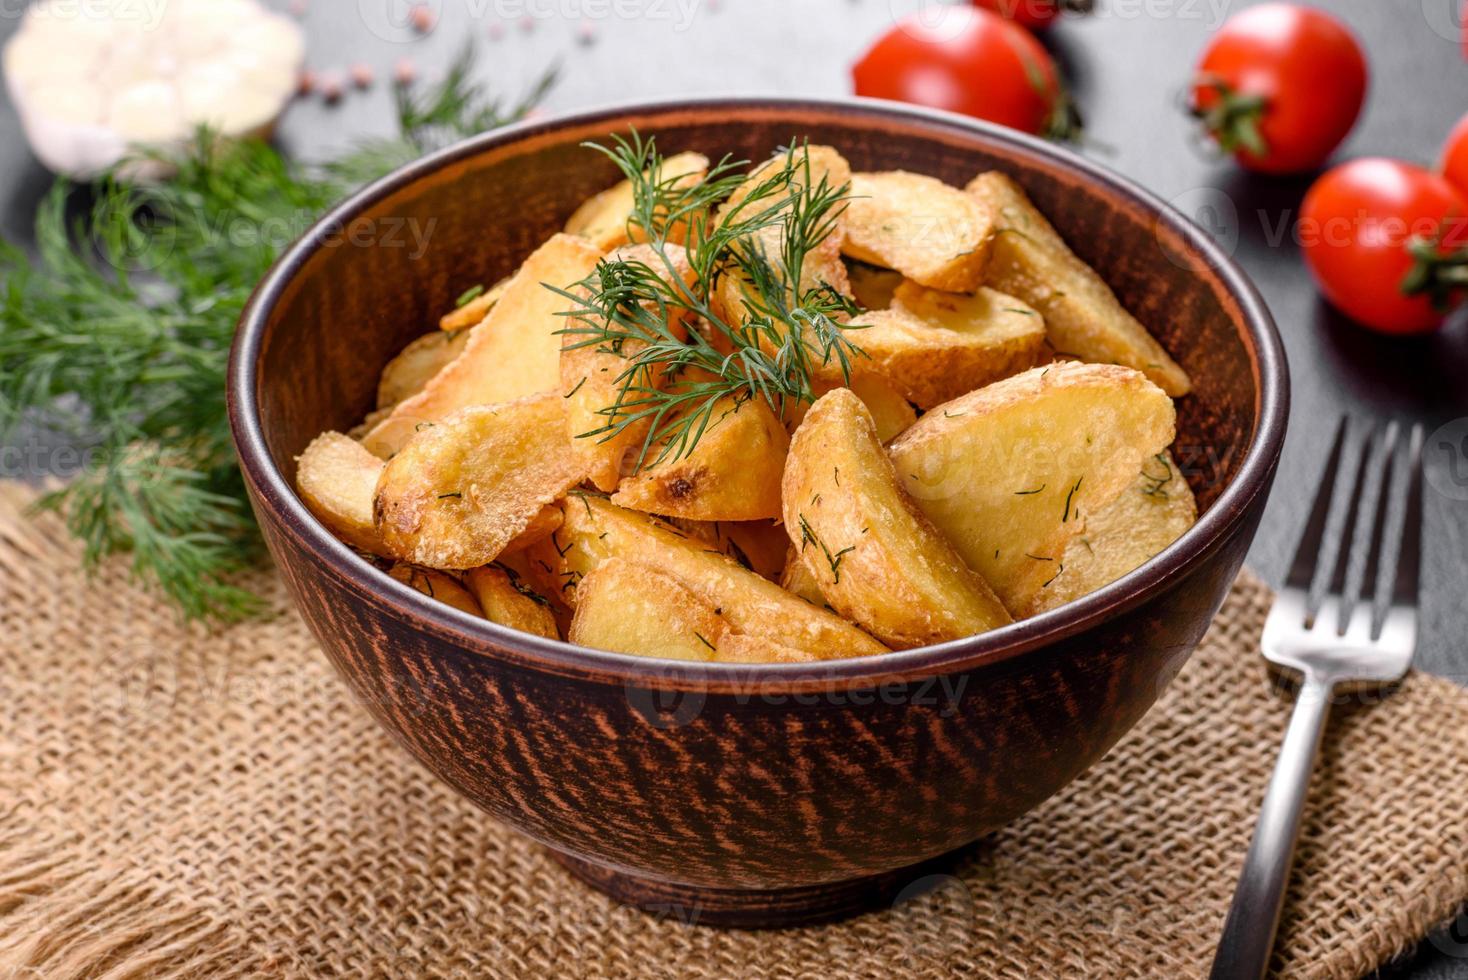 Tasty baked potatoes in a rustic way with spices and herbs in a brown deep plate photo